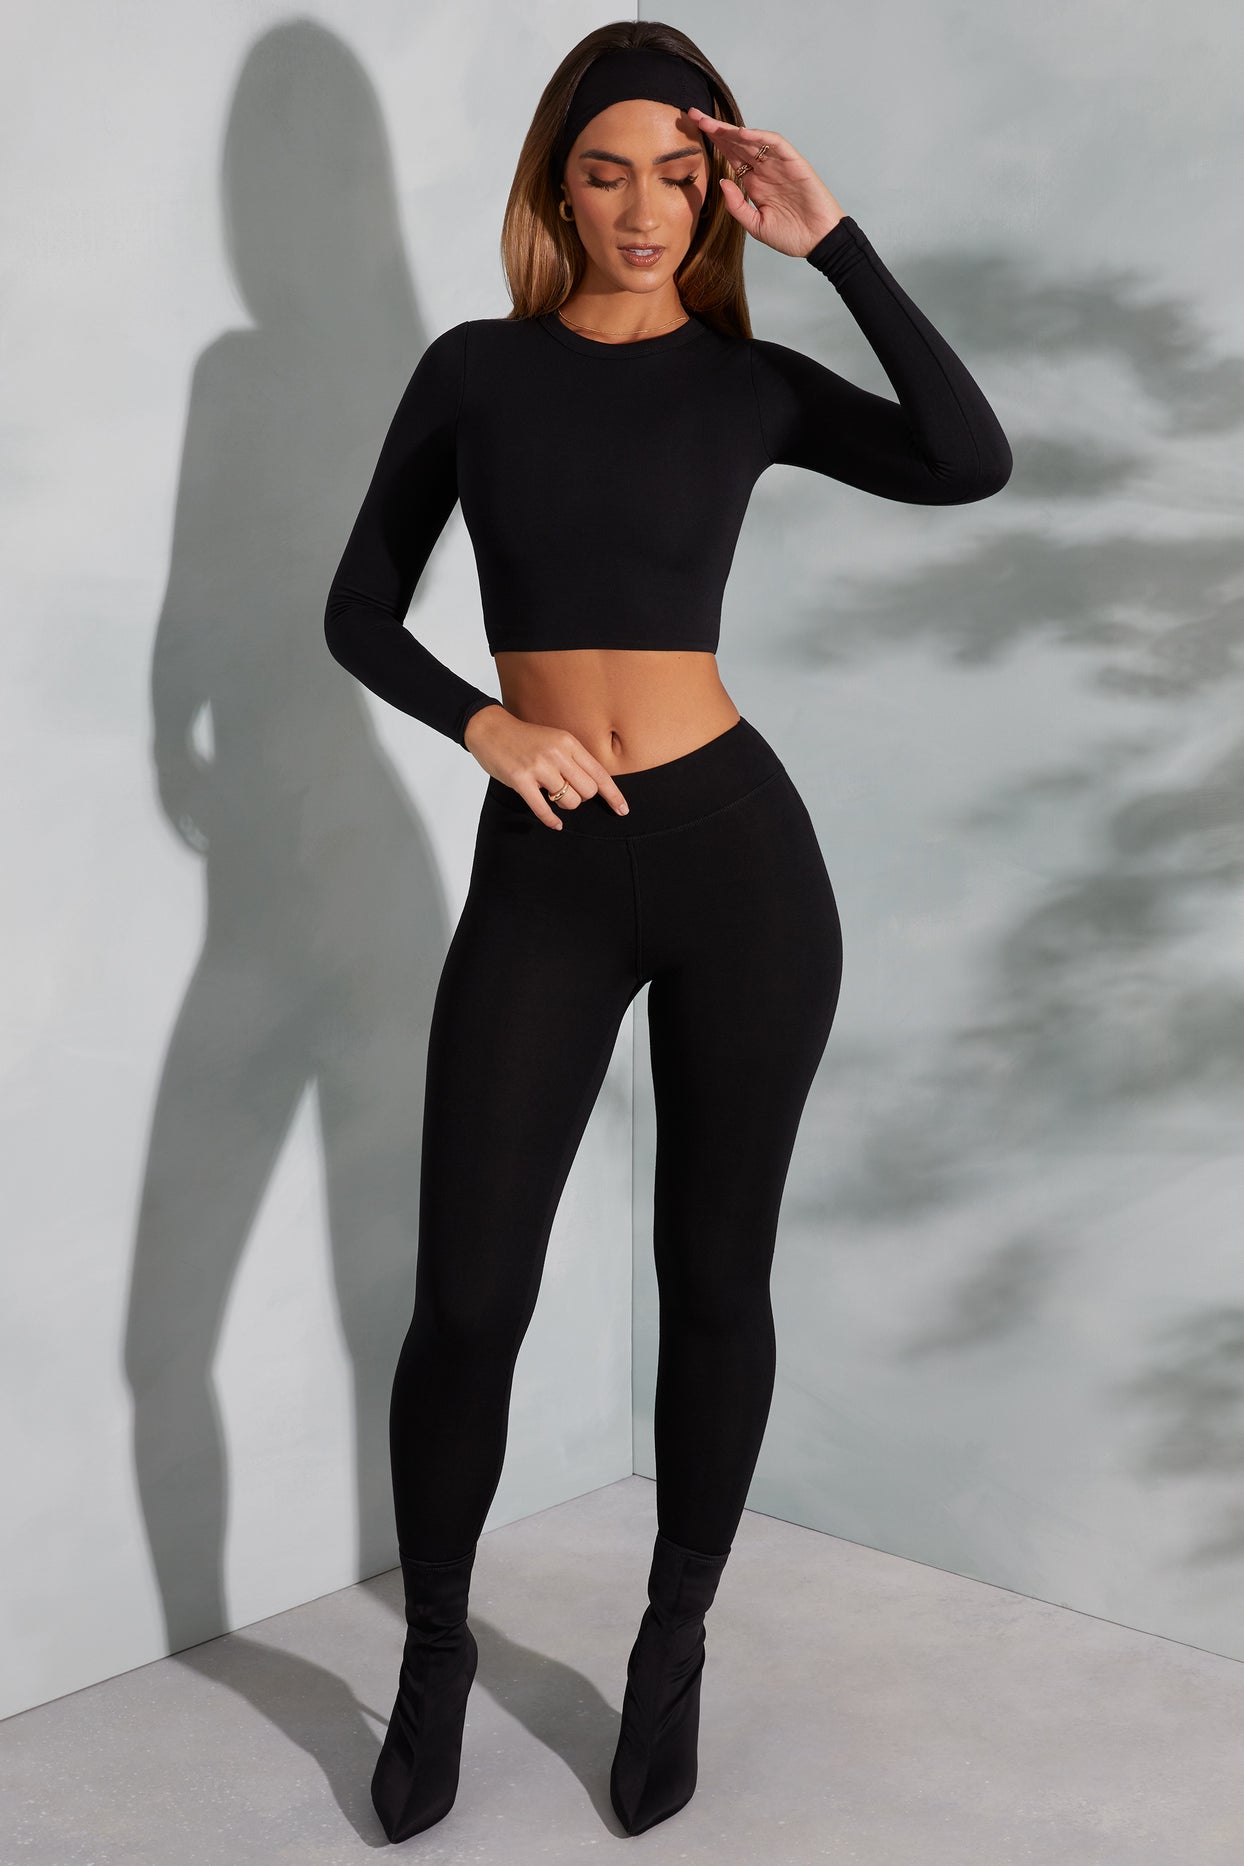 Round Neck Long Sleeve Top in Black